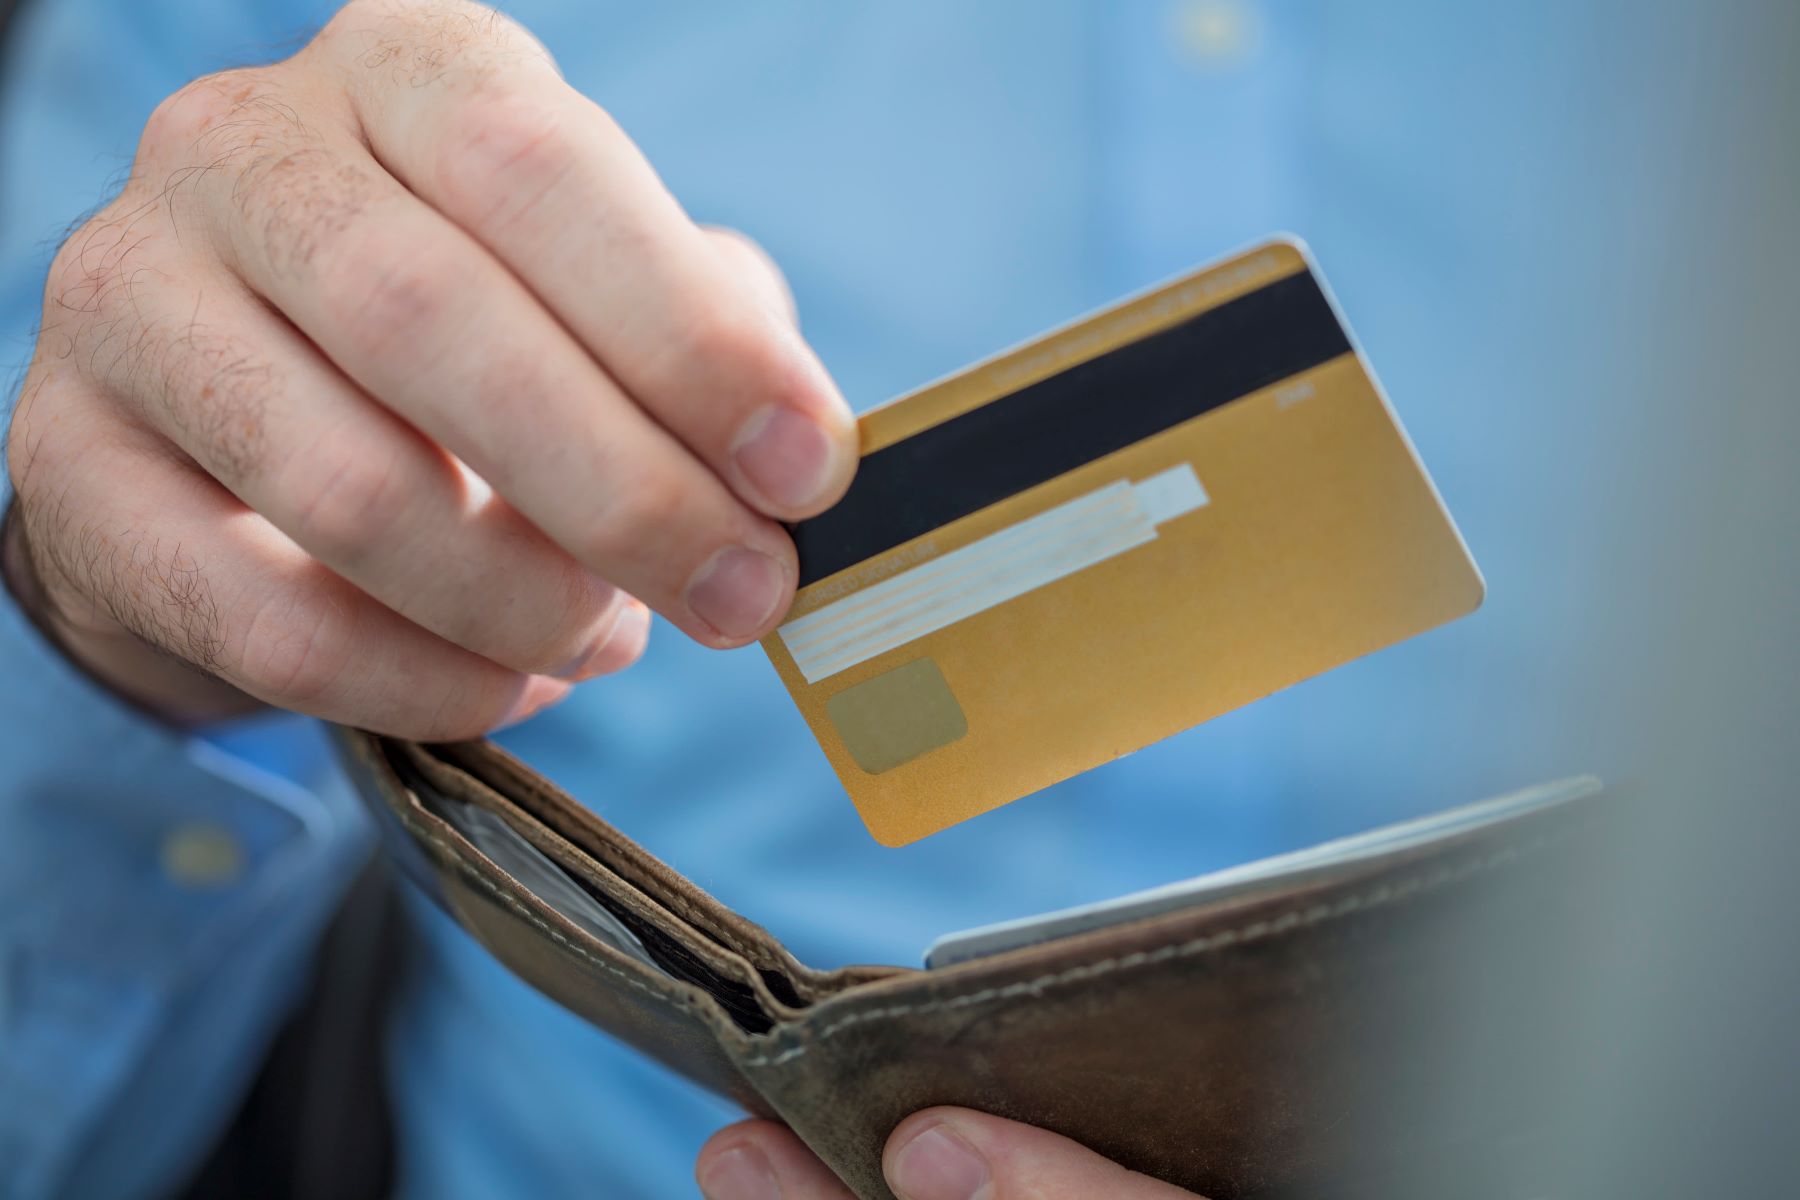 What To Buy With Credit Card To Build Credit